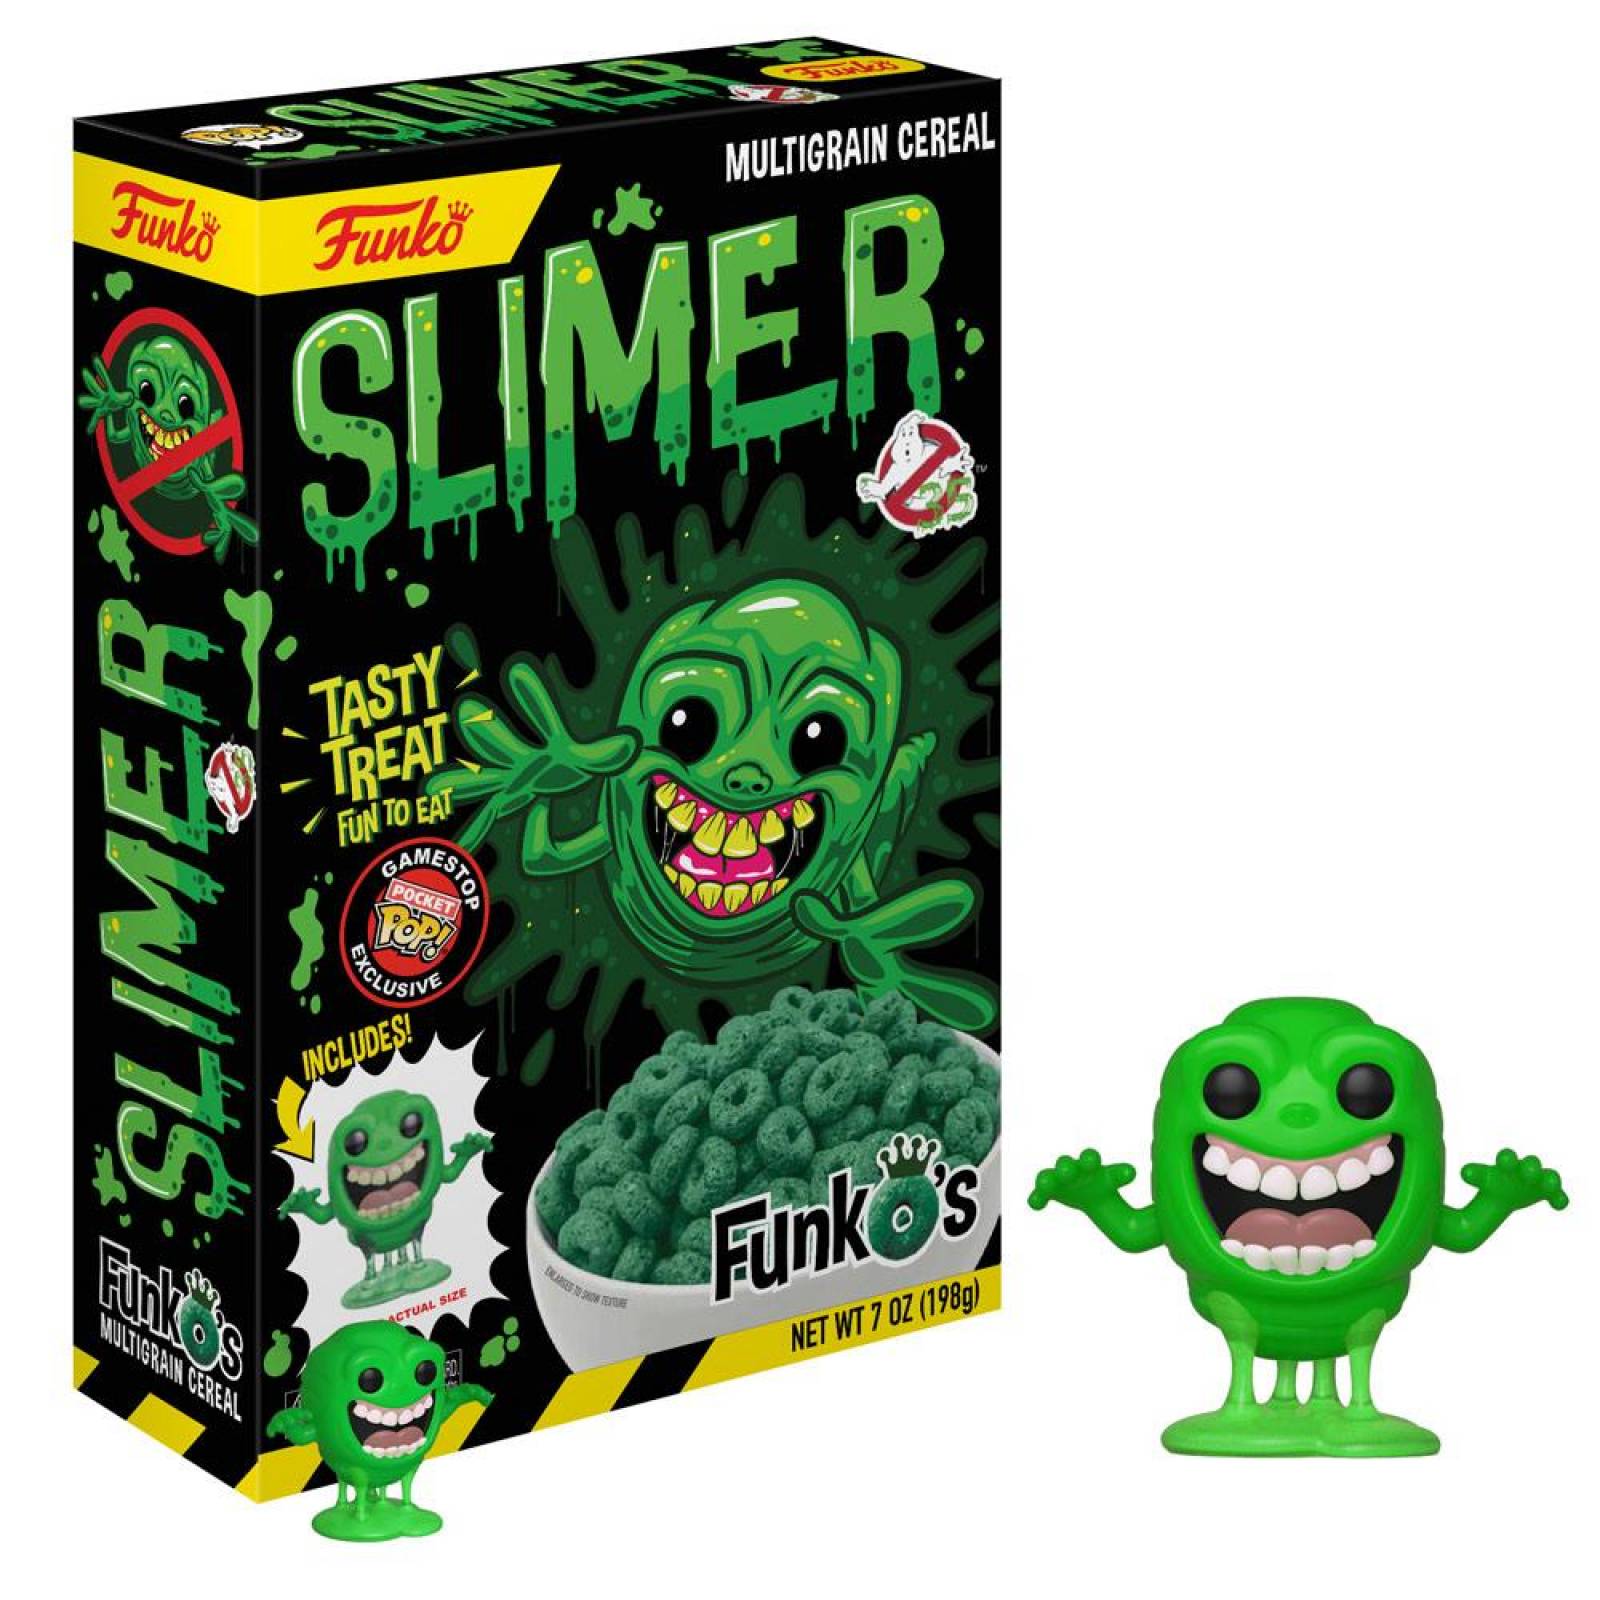 Slimer FunkOs Cereal Ghostbusters Exclusivo 